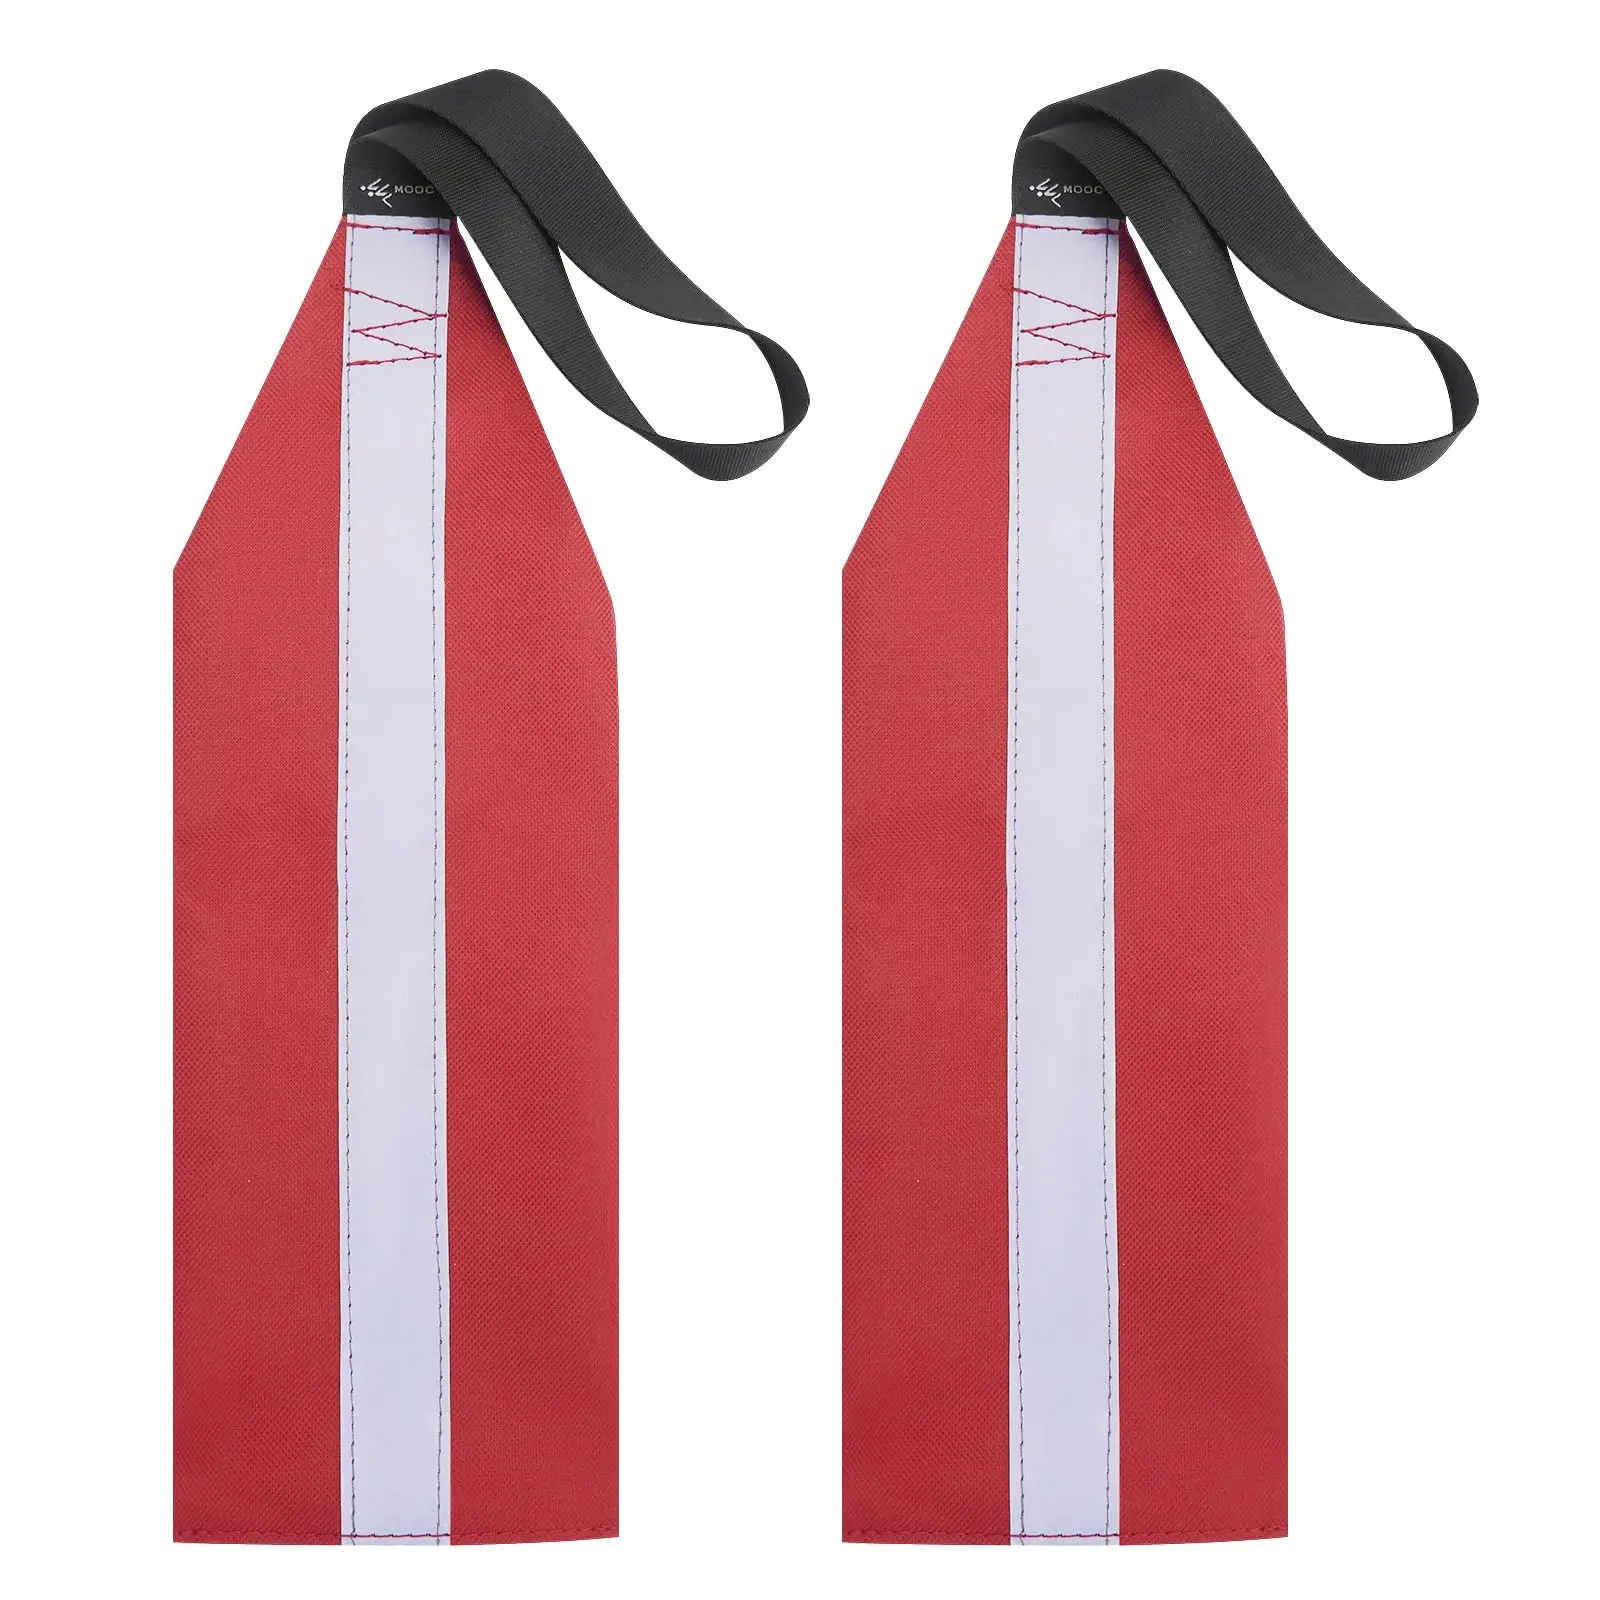 Red Flag Truck Loads (Pack of 2), Warning Flags for Kayak Safety Towing,Travel Trailer Tow Accessories